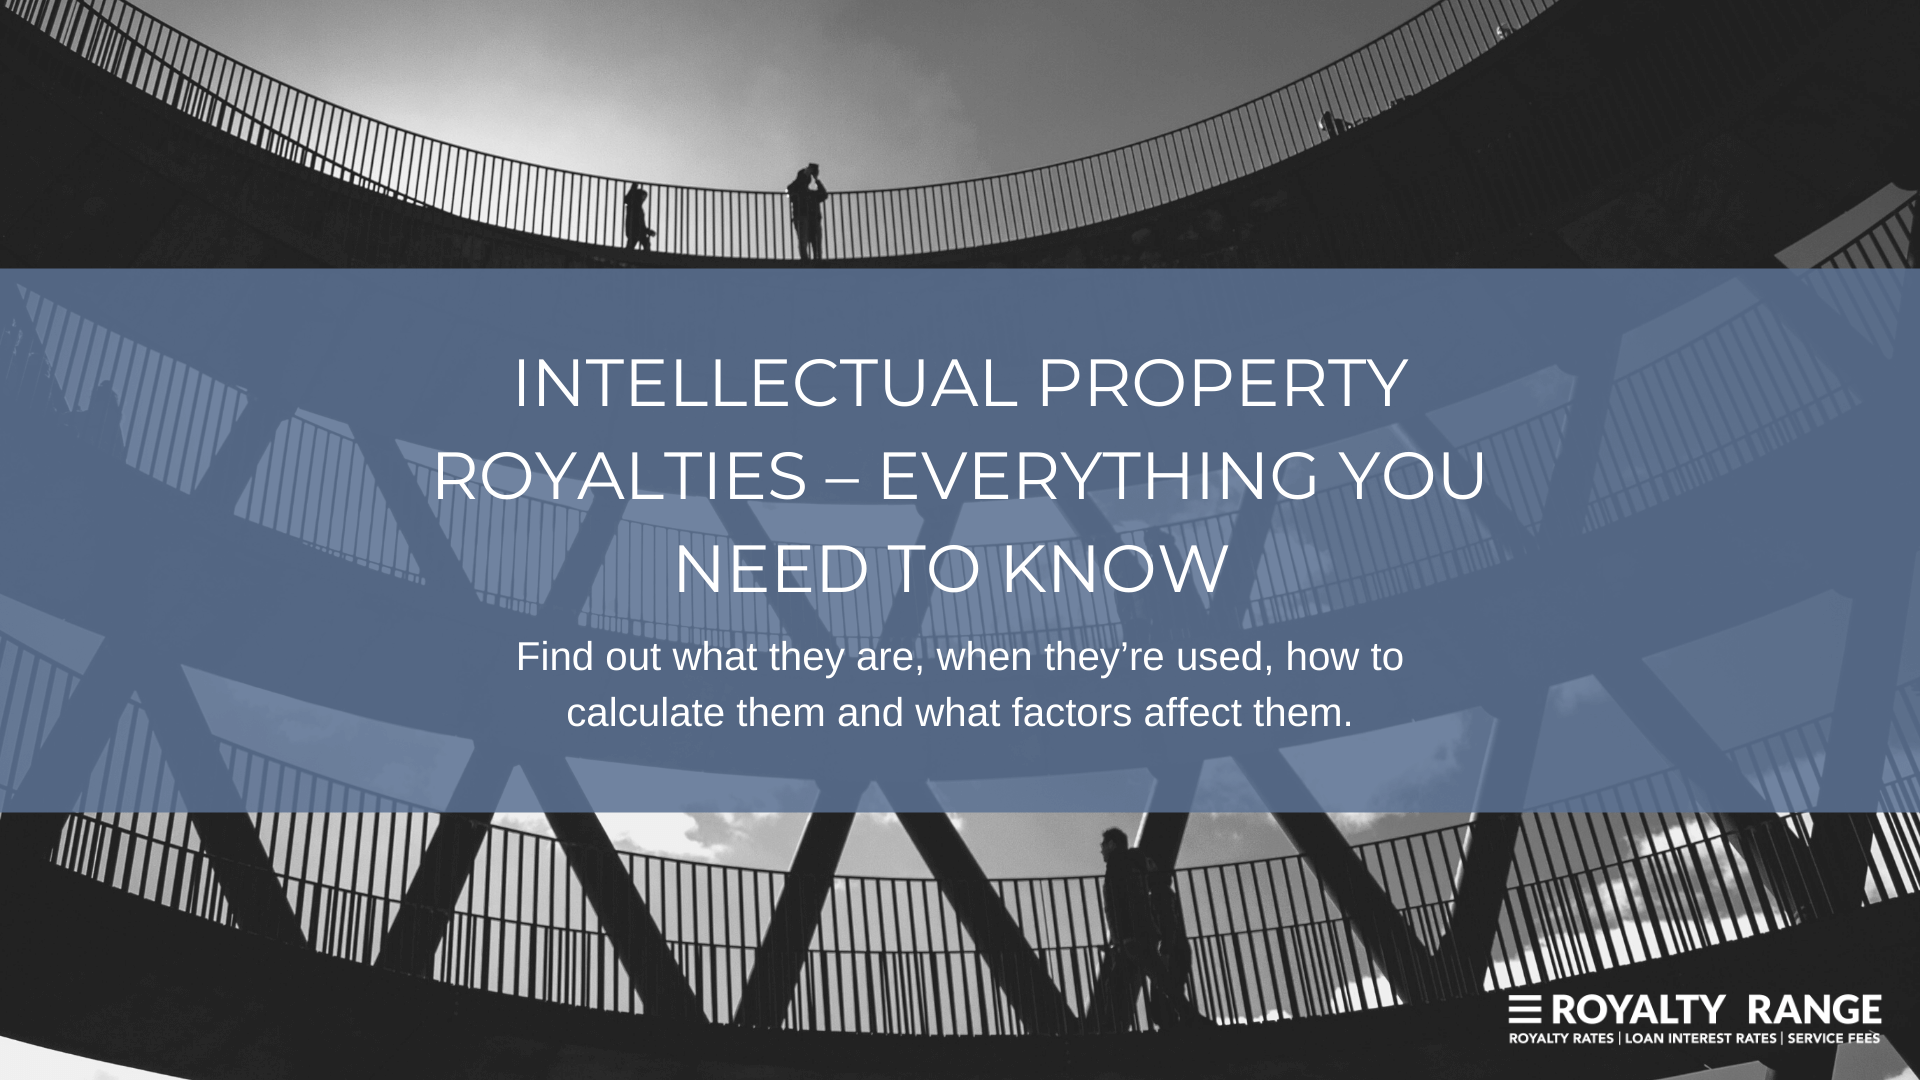 Intellectual property royalties – everything you need to know